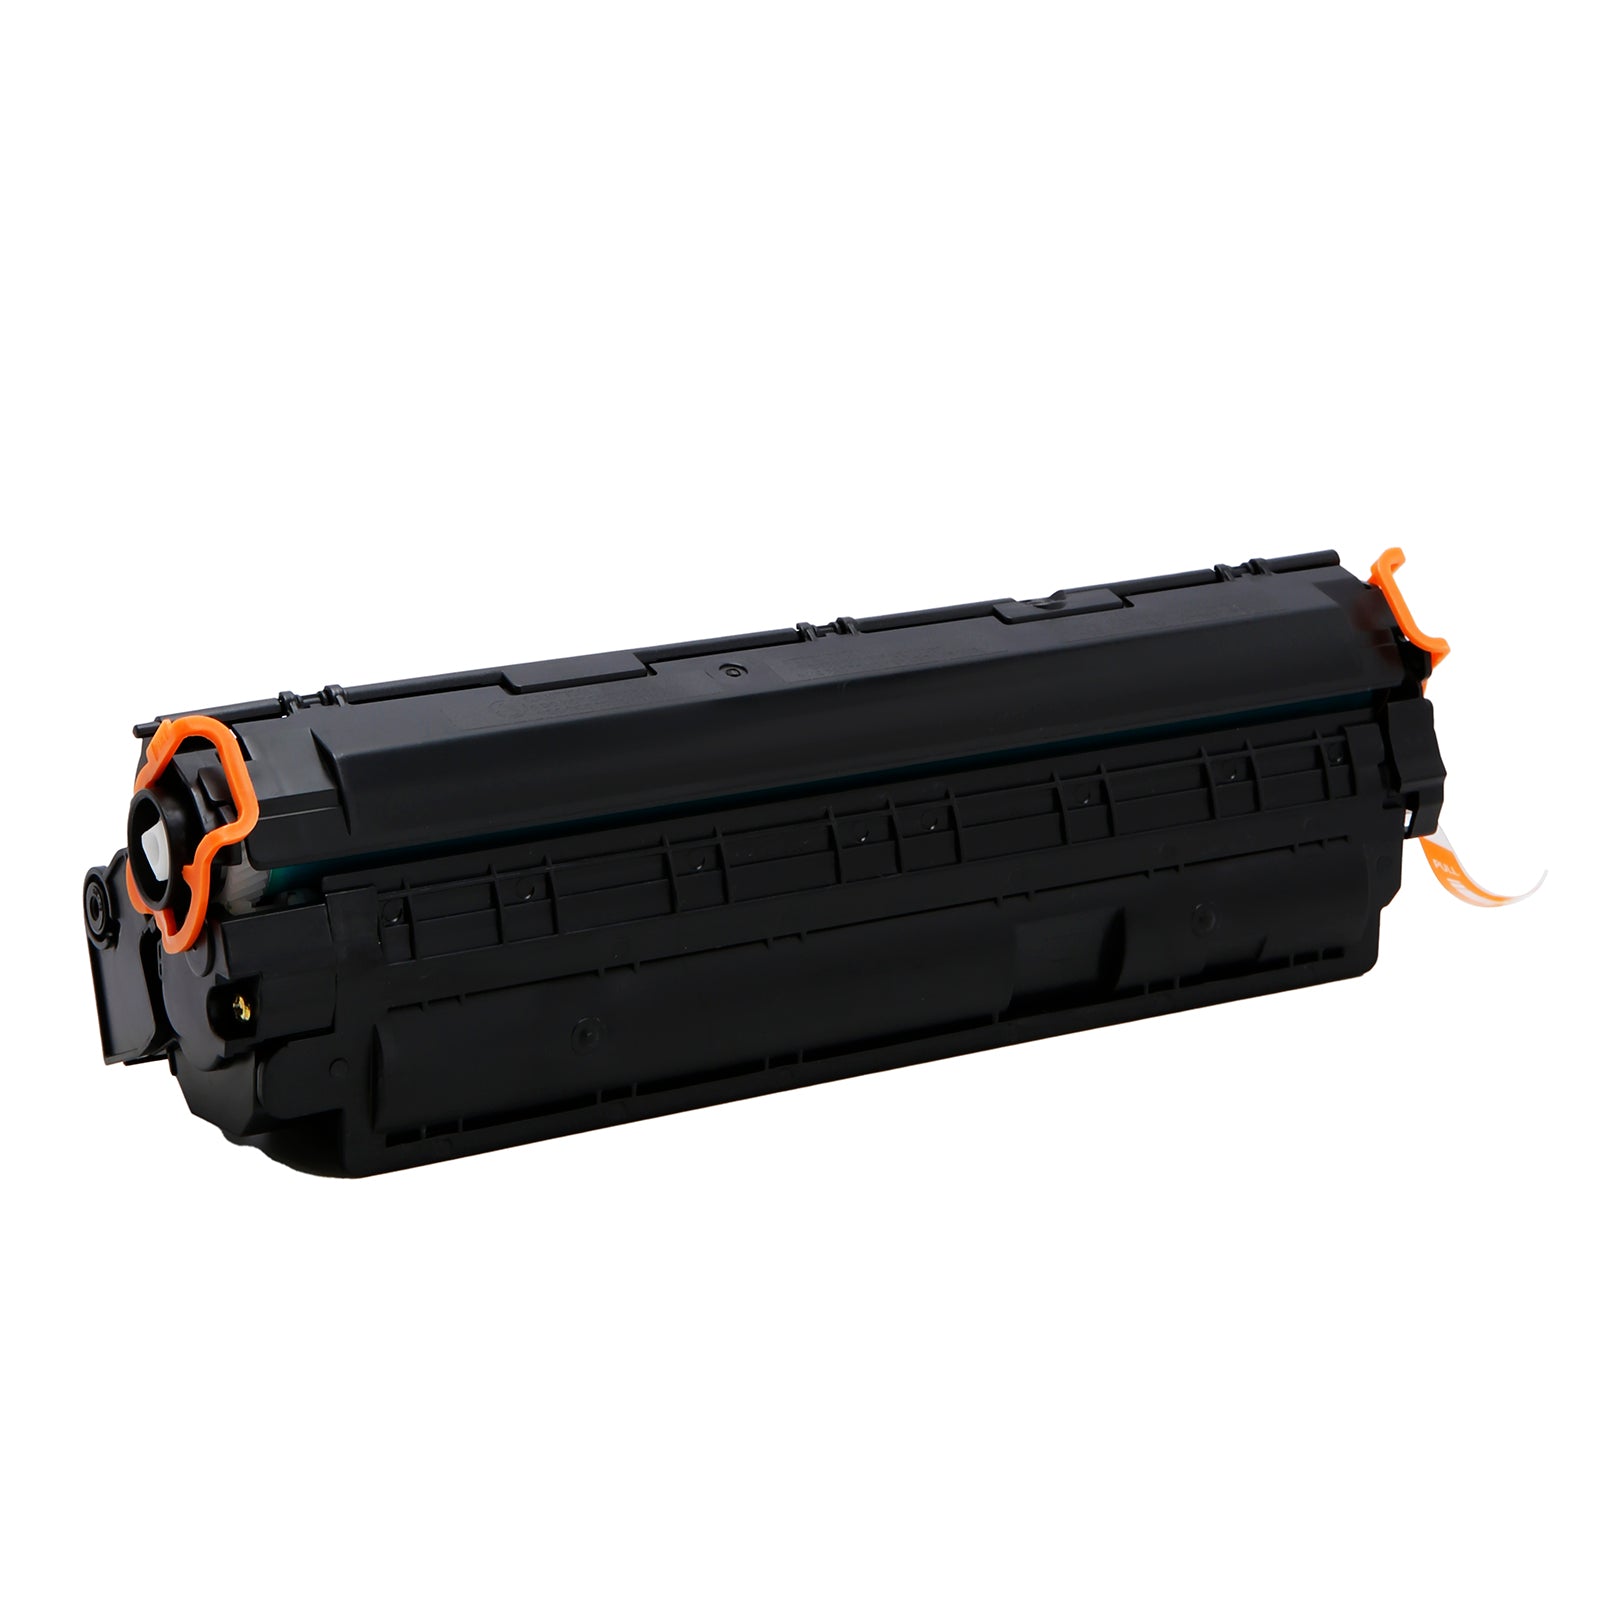 SKY 85A Toner Cartridge CE285A for P1102 and M1132 and M1212 printers